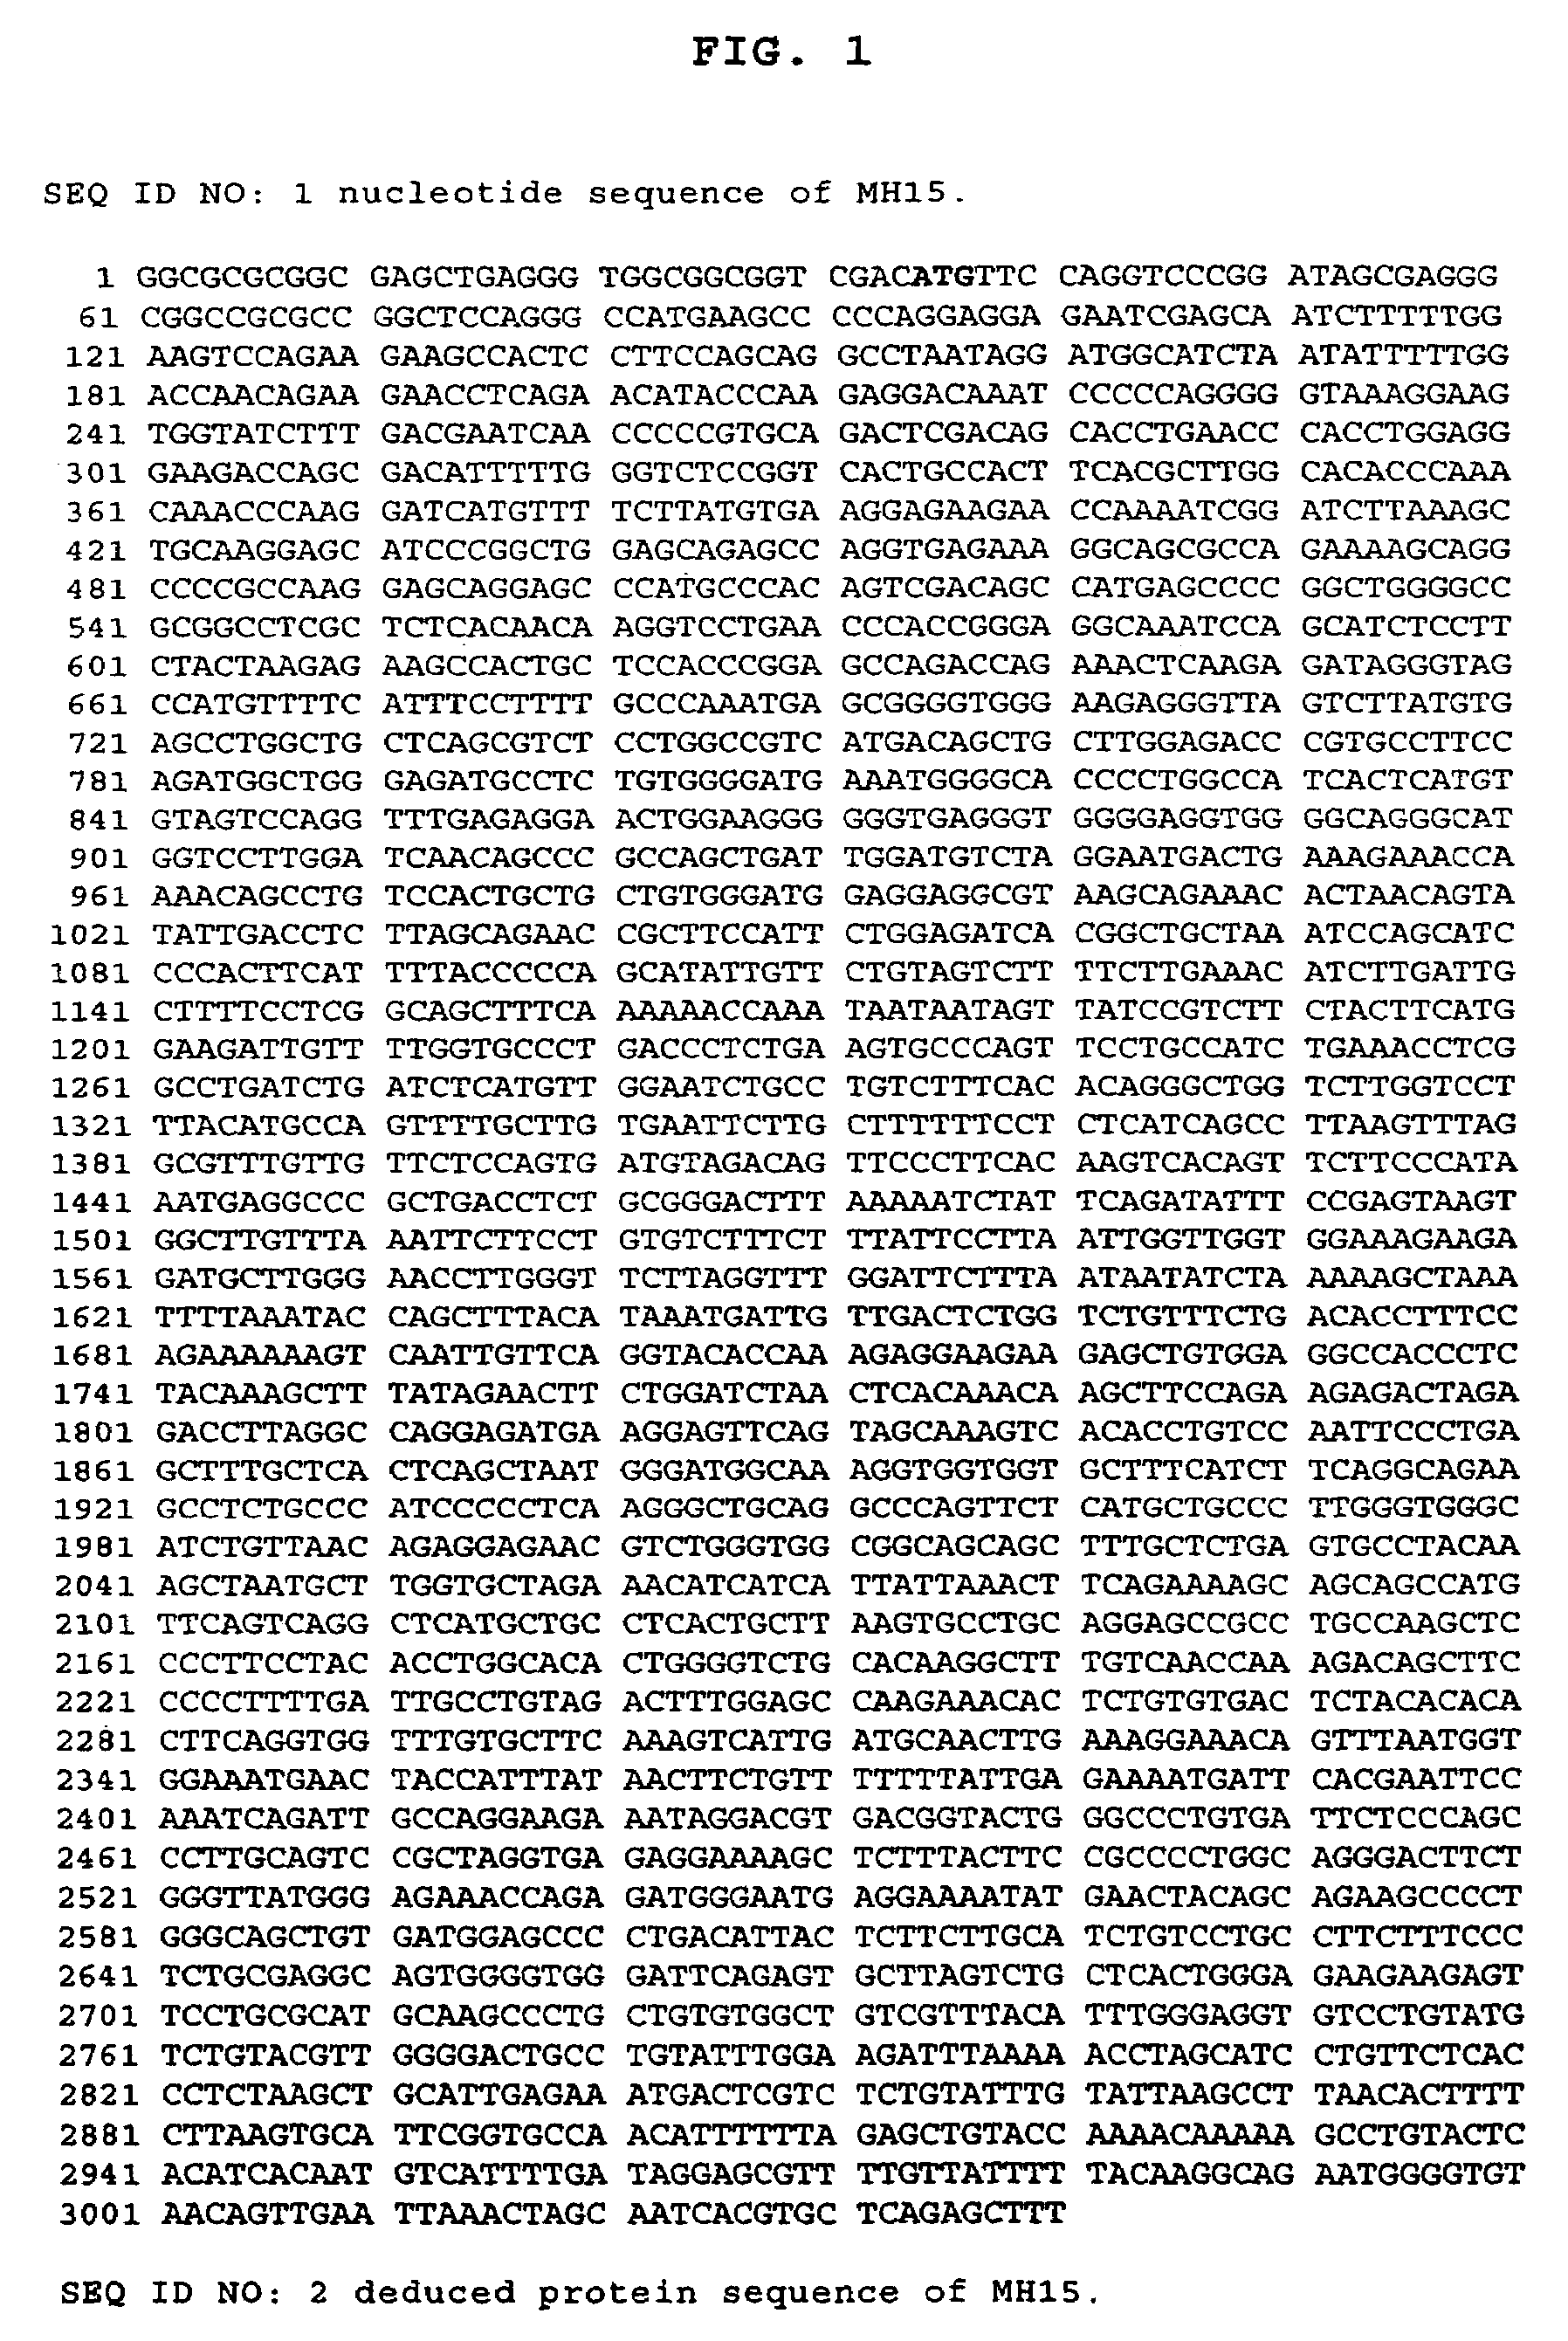 Cancer specific gene MH15